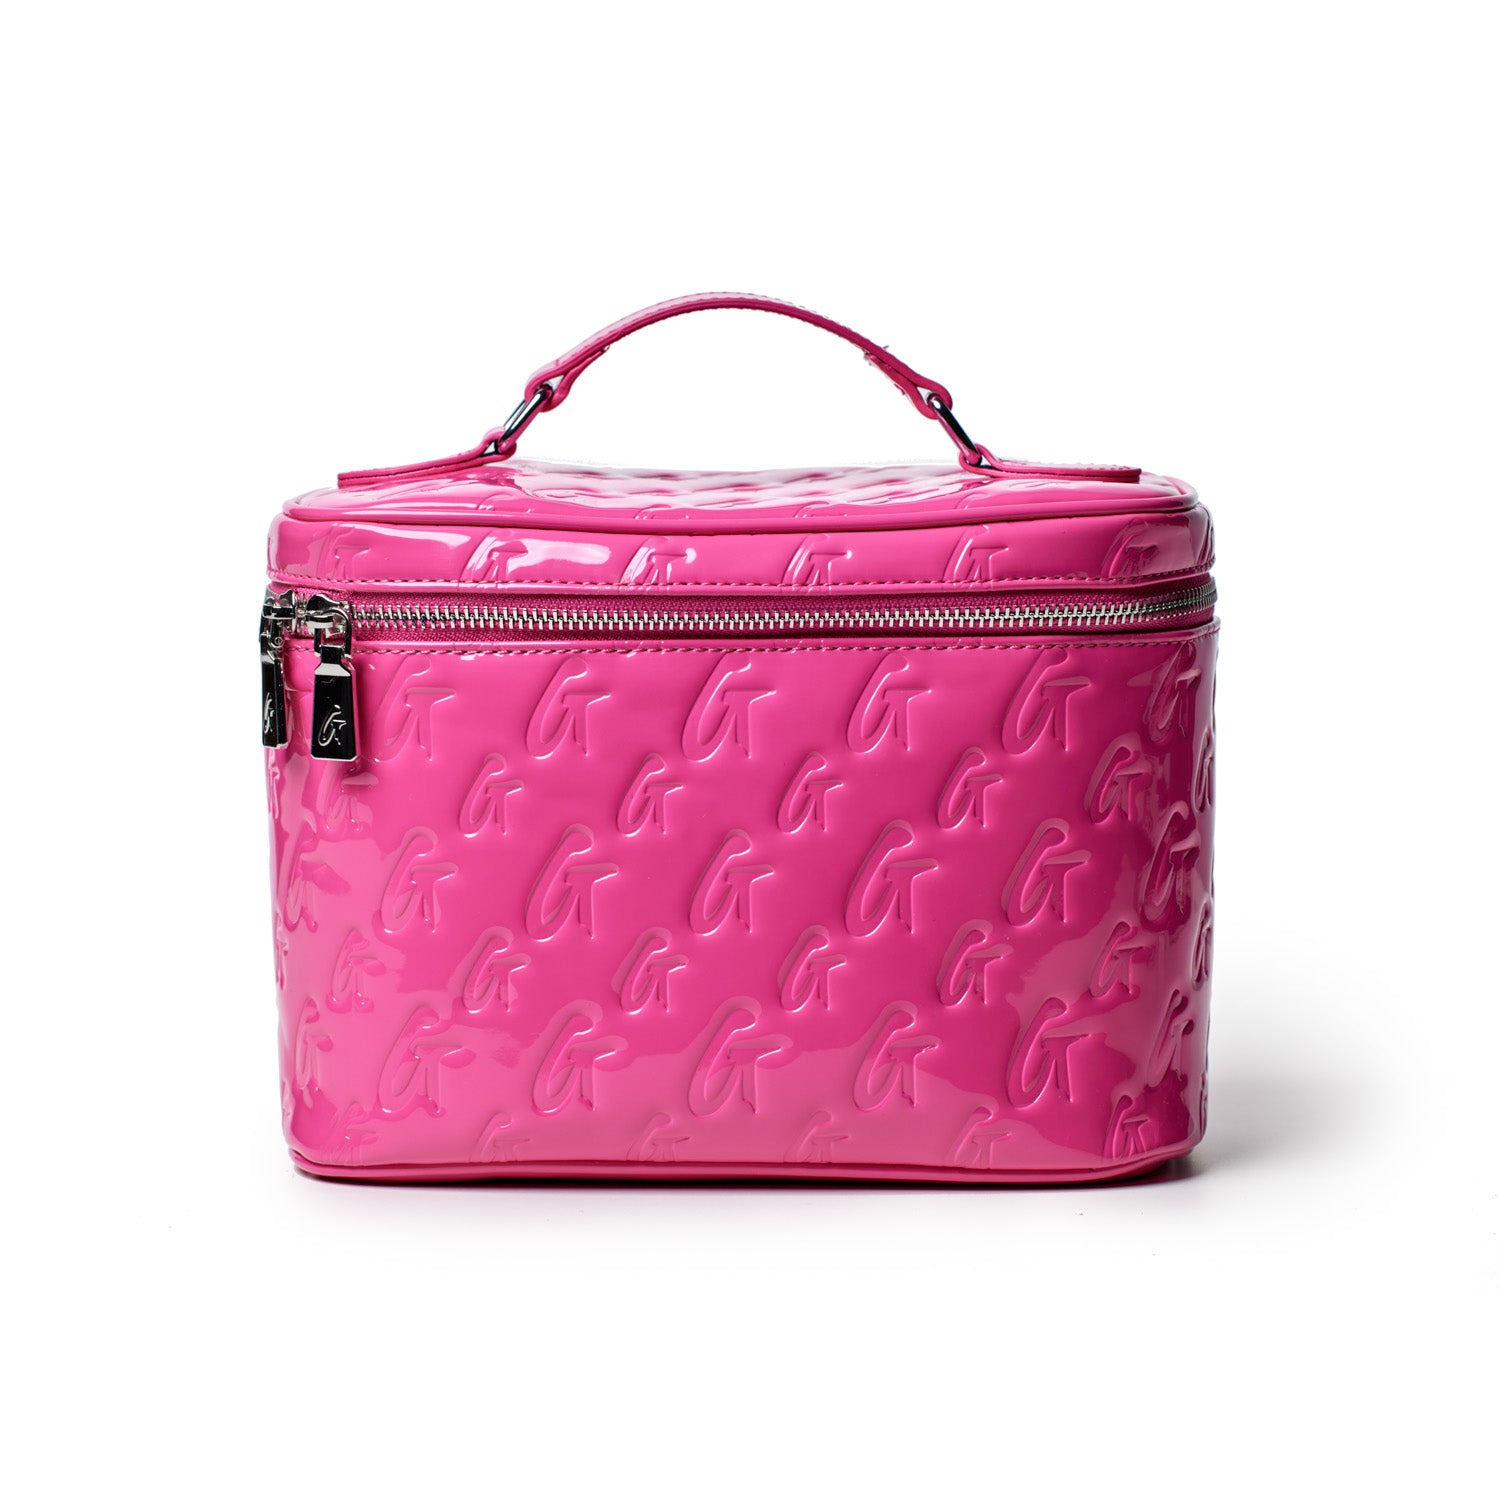 MONOGRAM COSMETIC POUCH MIRROR PINK – Glam-Aholic Lifestyle